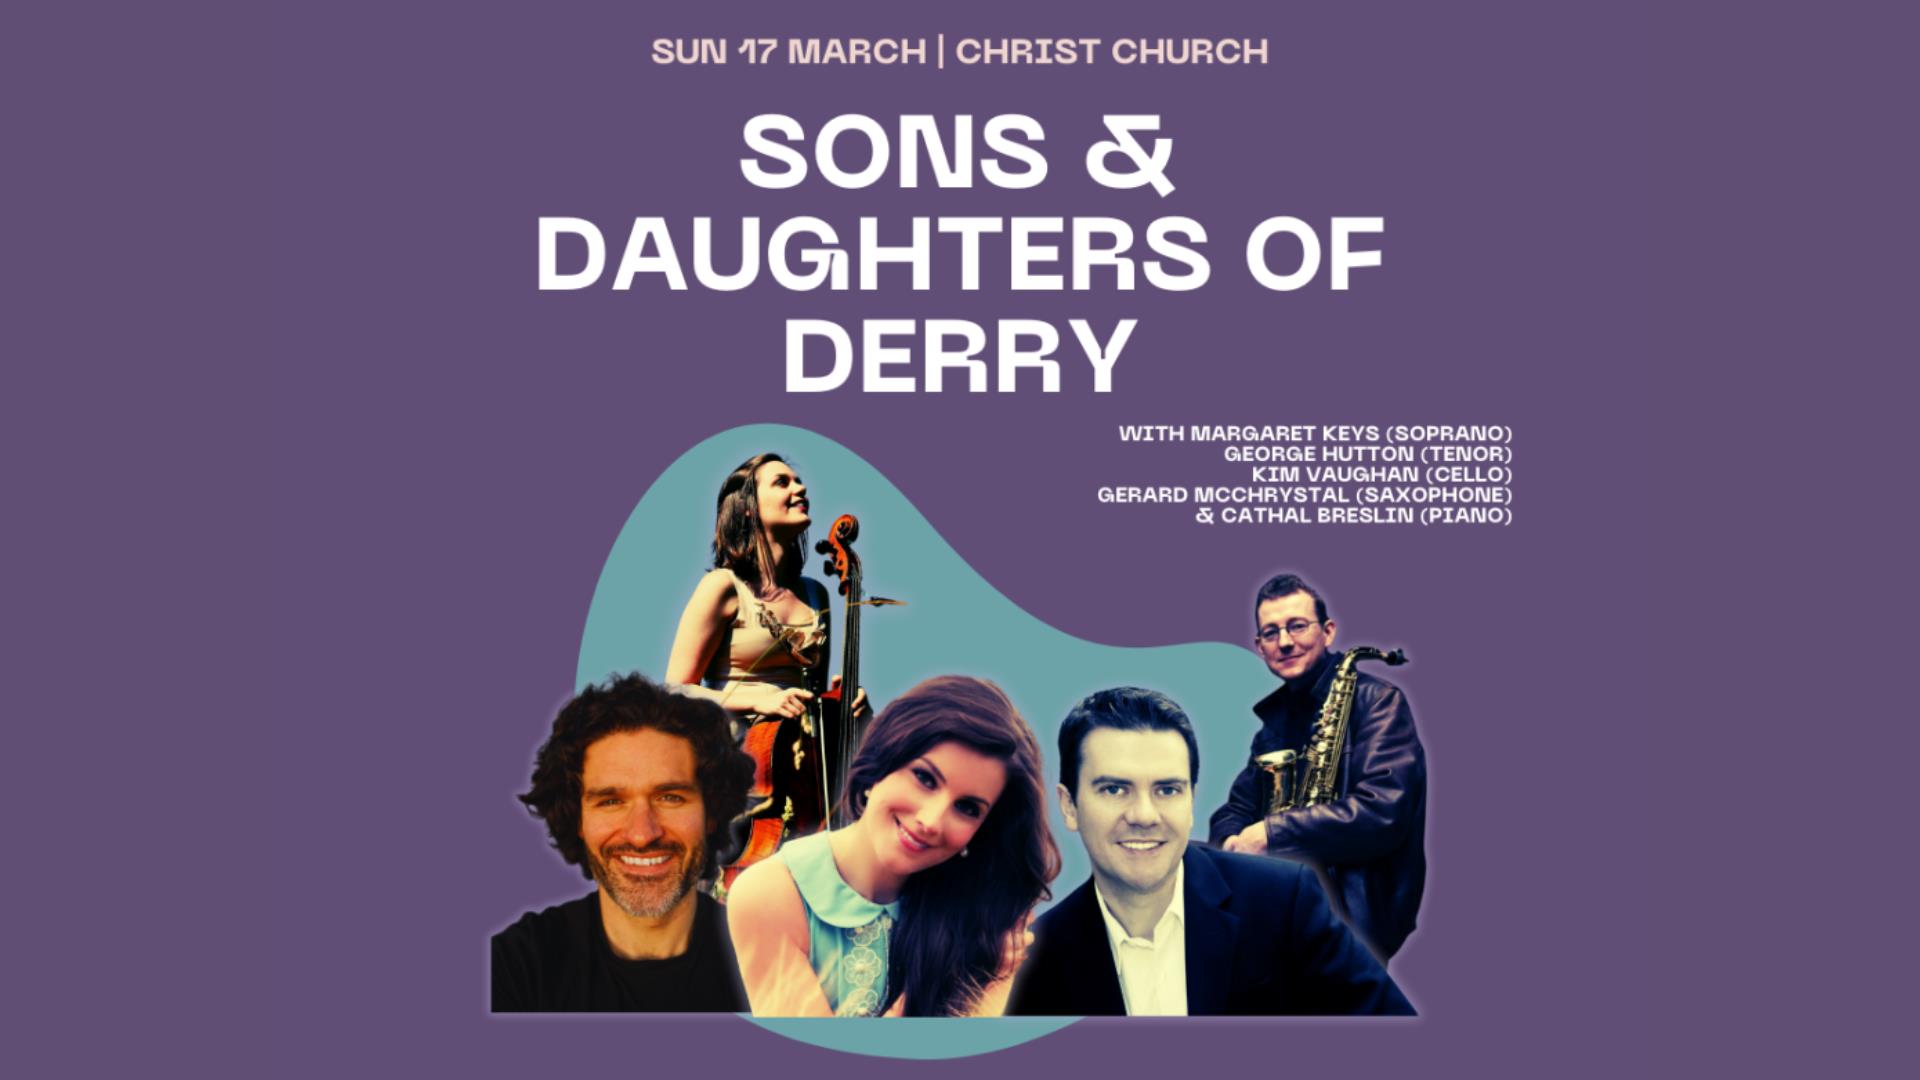 Promotional image for the 'Sons and Daughters of Derry' event, showing the featured artists.